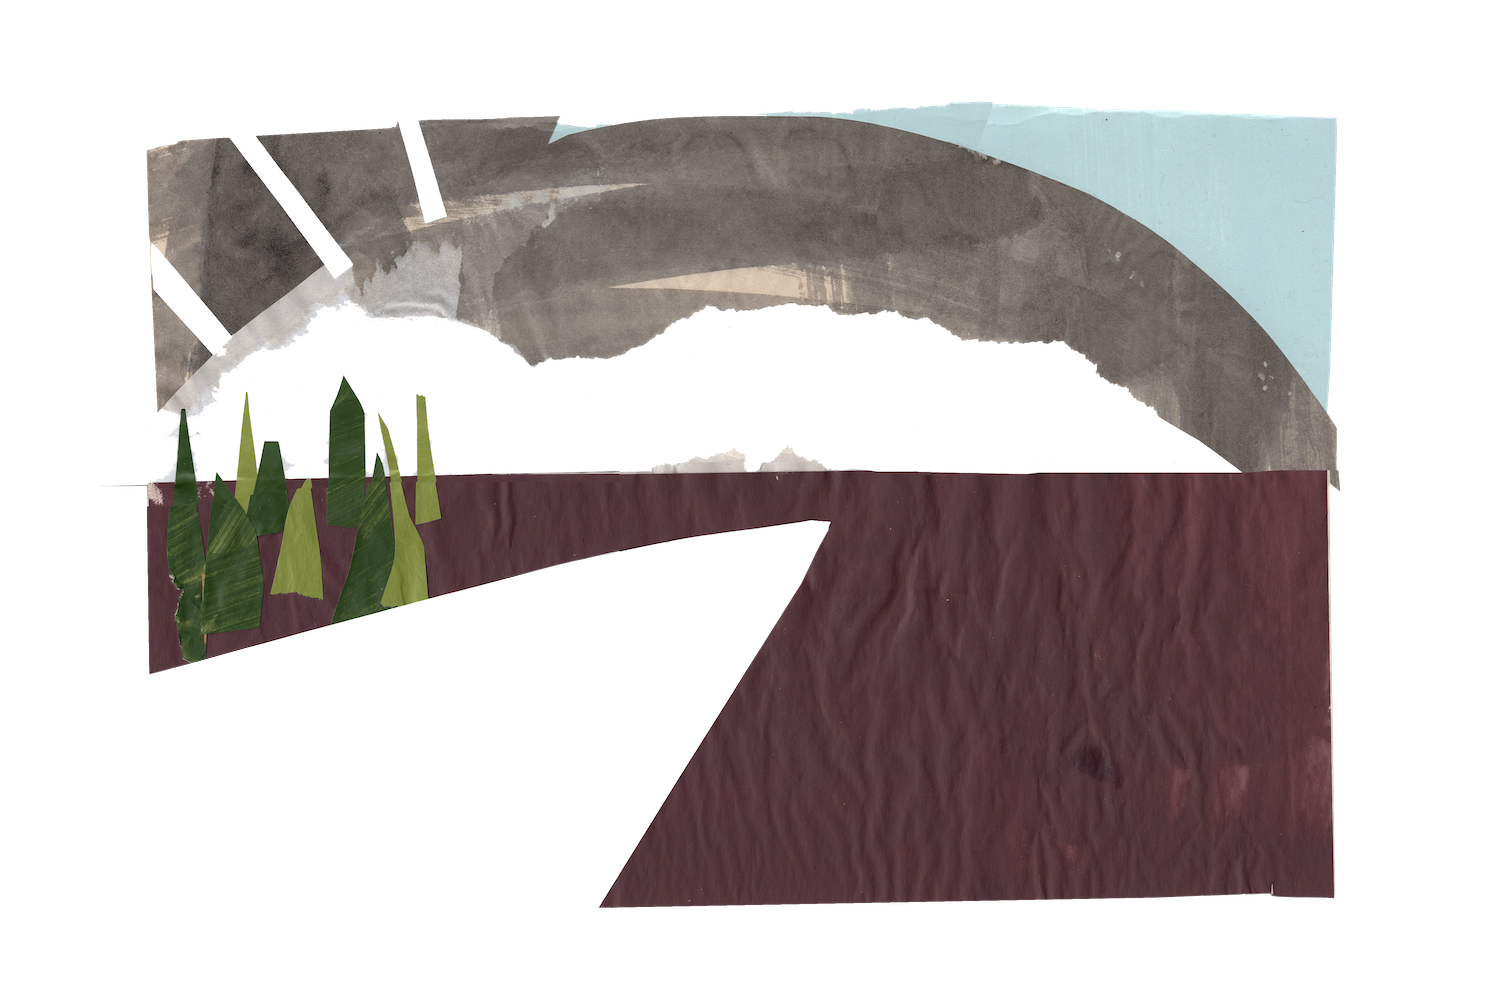 A collage of paper cutouts showing a brown landscape, a patch green evergreen trees on the left, a white road shrinking into the distance, and a large white and gray sun taking up most of the sky. The horizon cuts horizontally across the image's center.